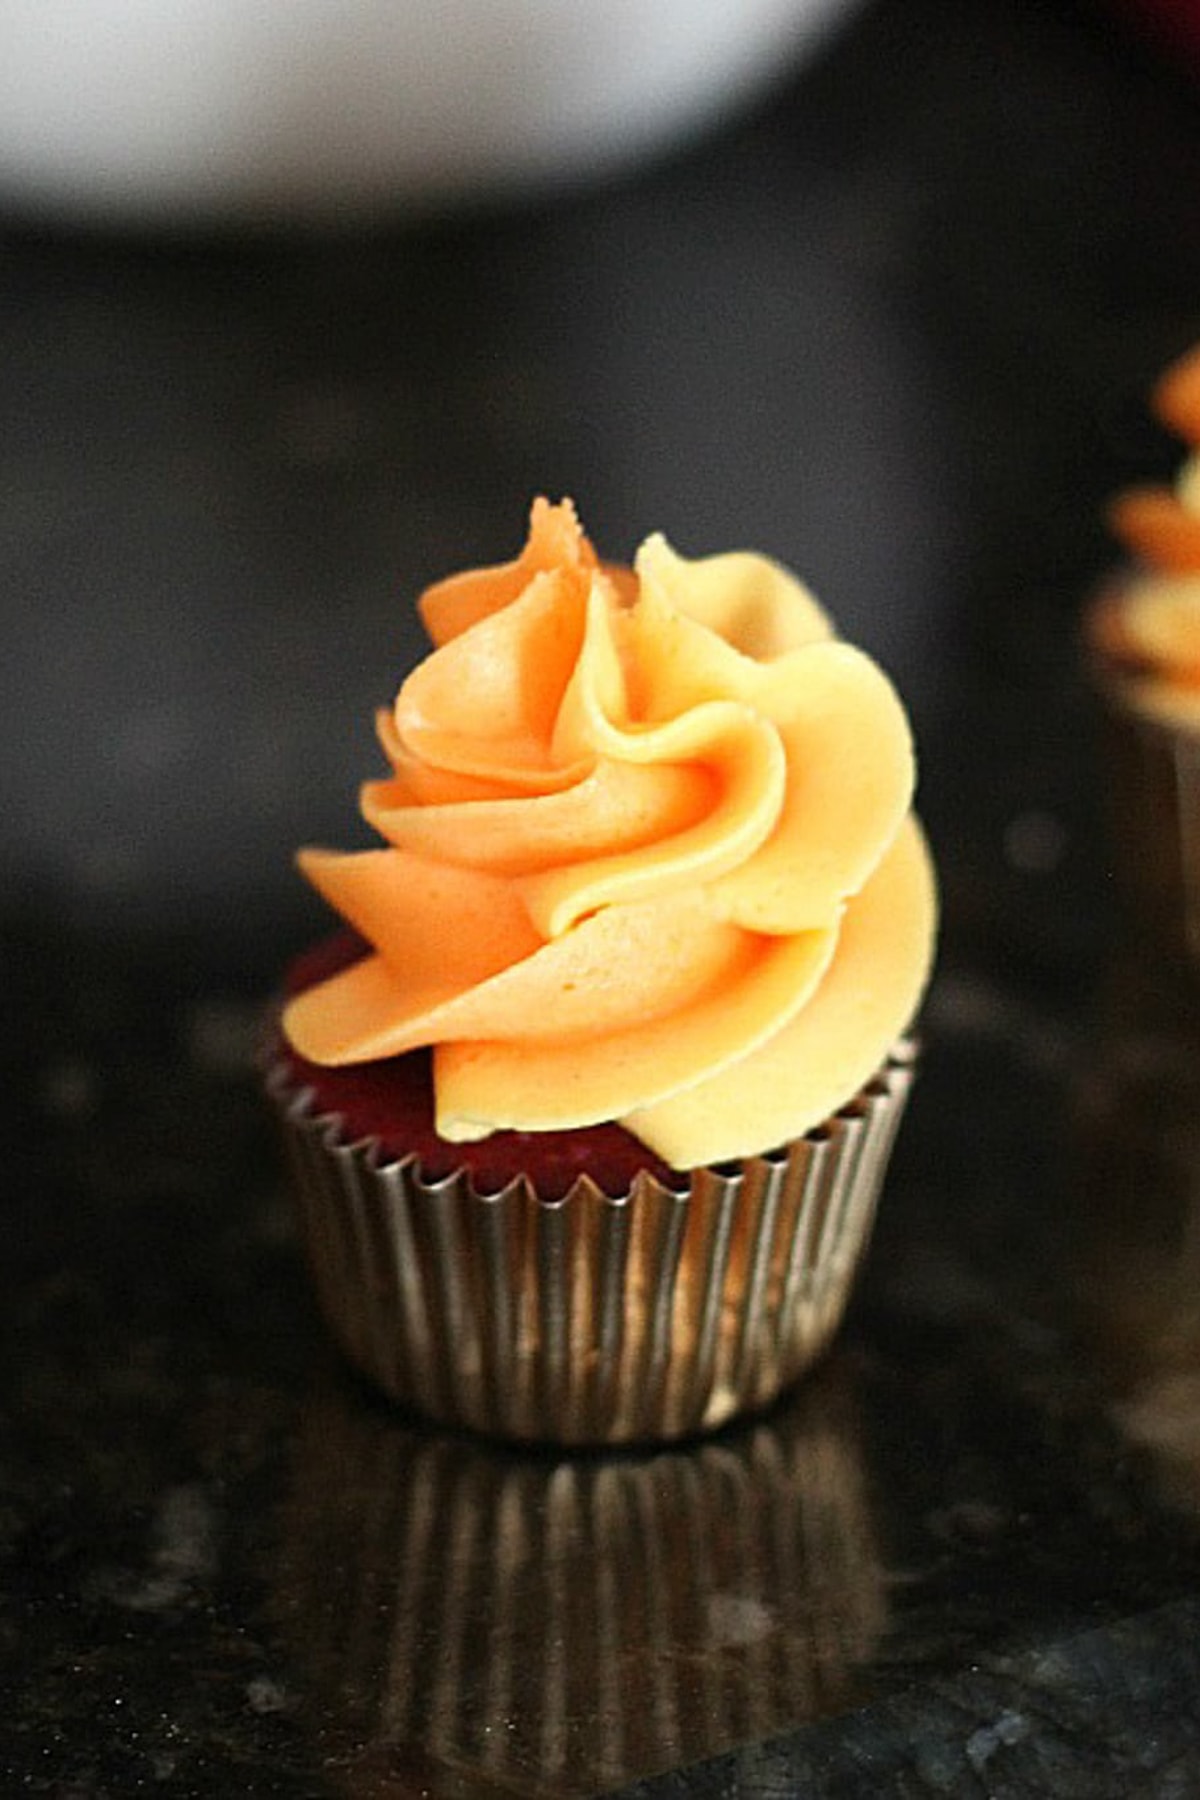 A mini cupcake topped with a swirl of orange frosting.